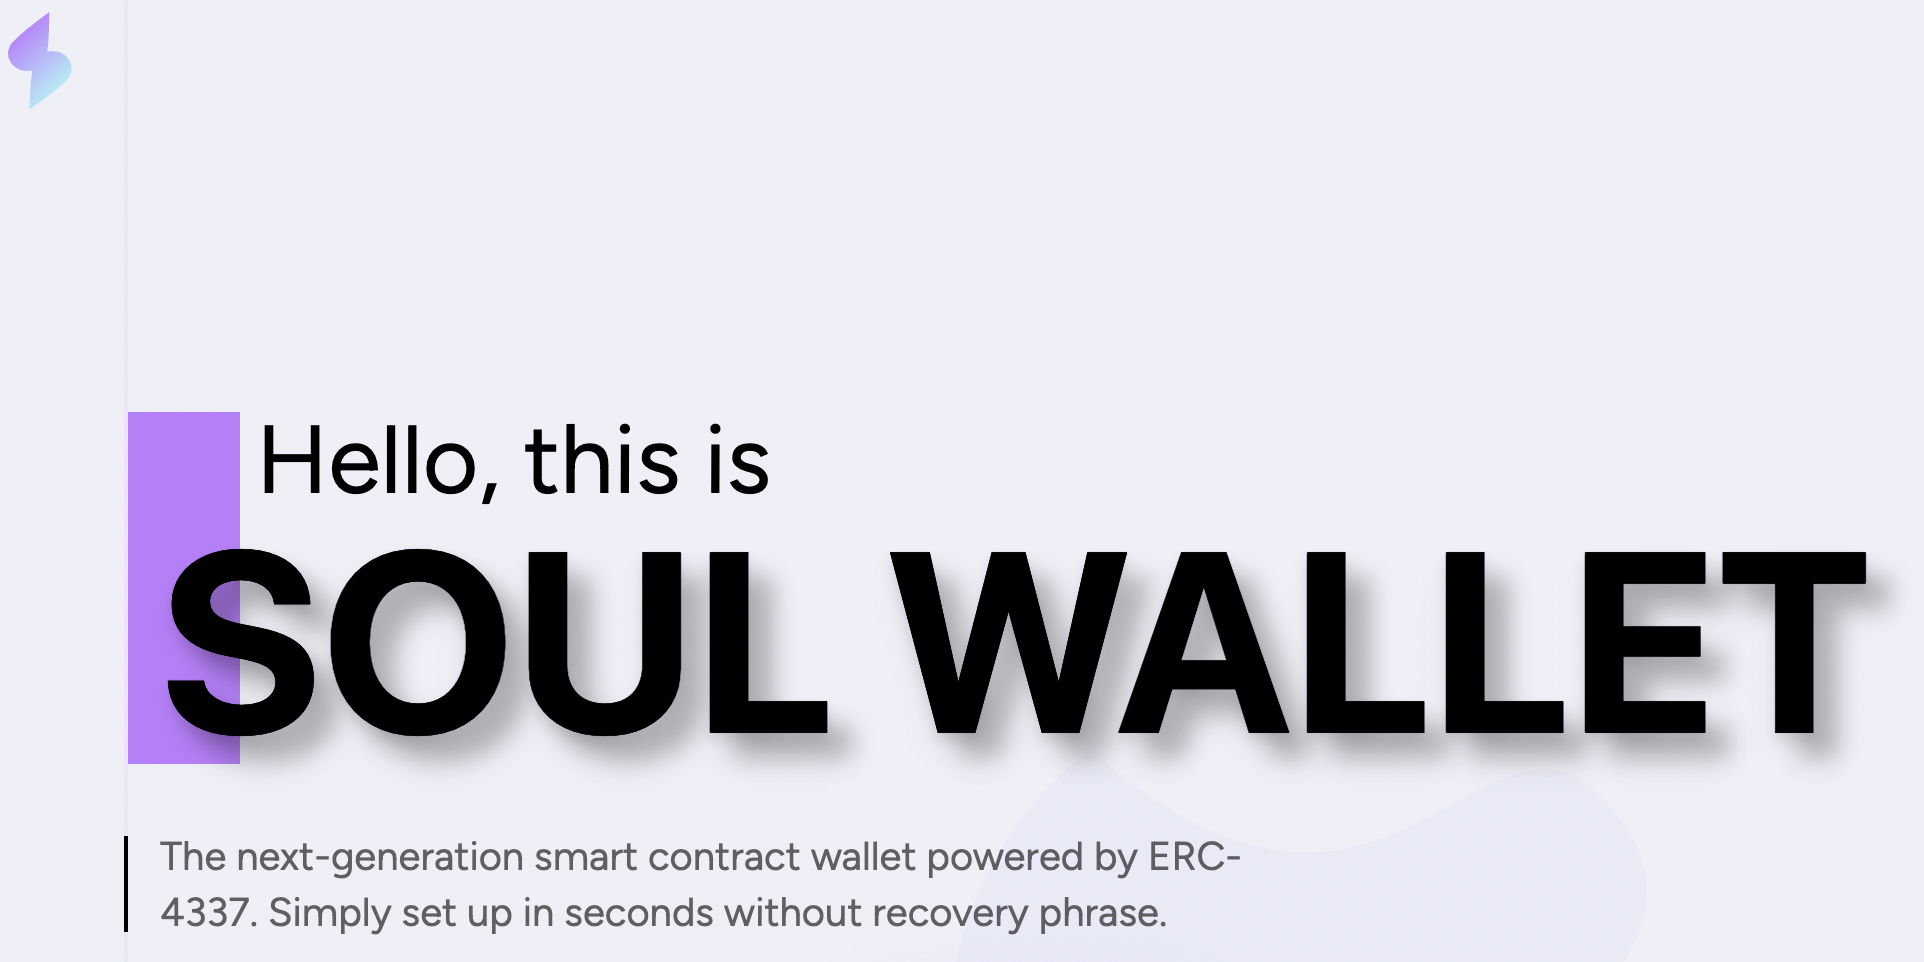 Signum Capital Participates in Soul Wallet's $3mil Seed Round